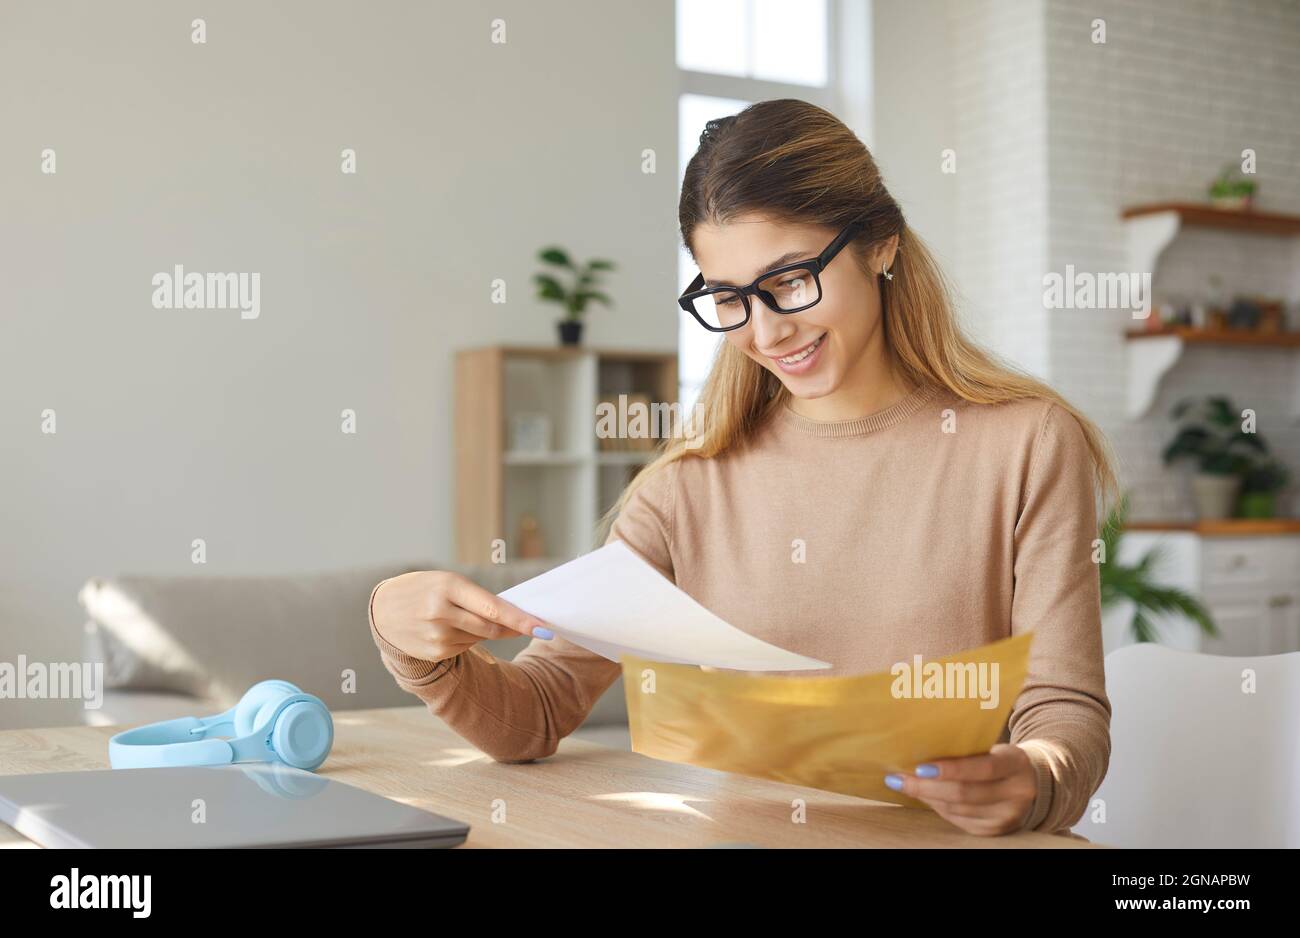 Smiling young woman who is excited by good news reads letter unfolded from paper envelope. Stock Photo